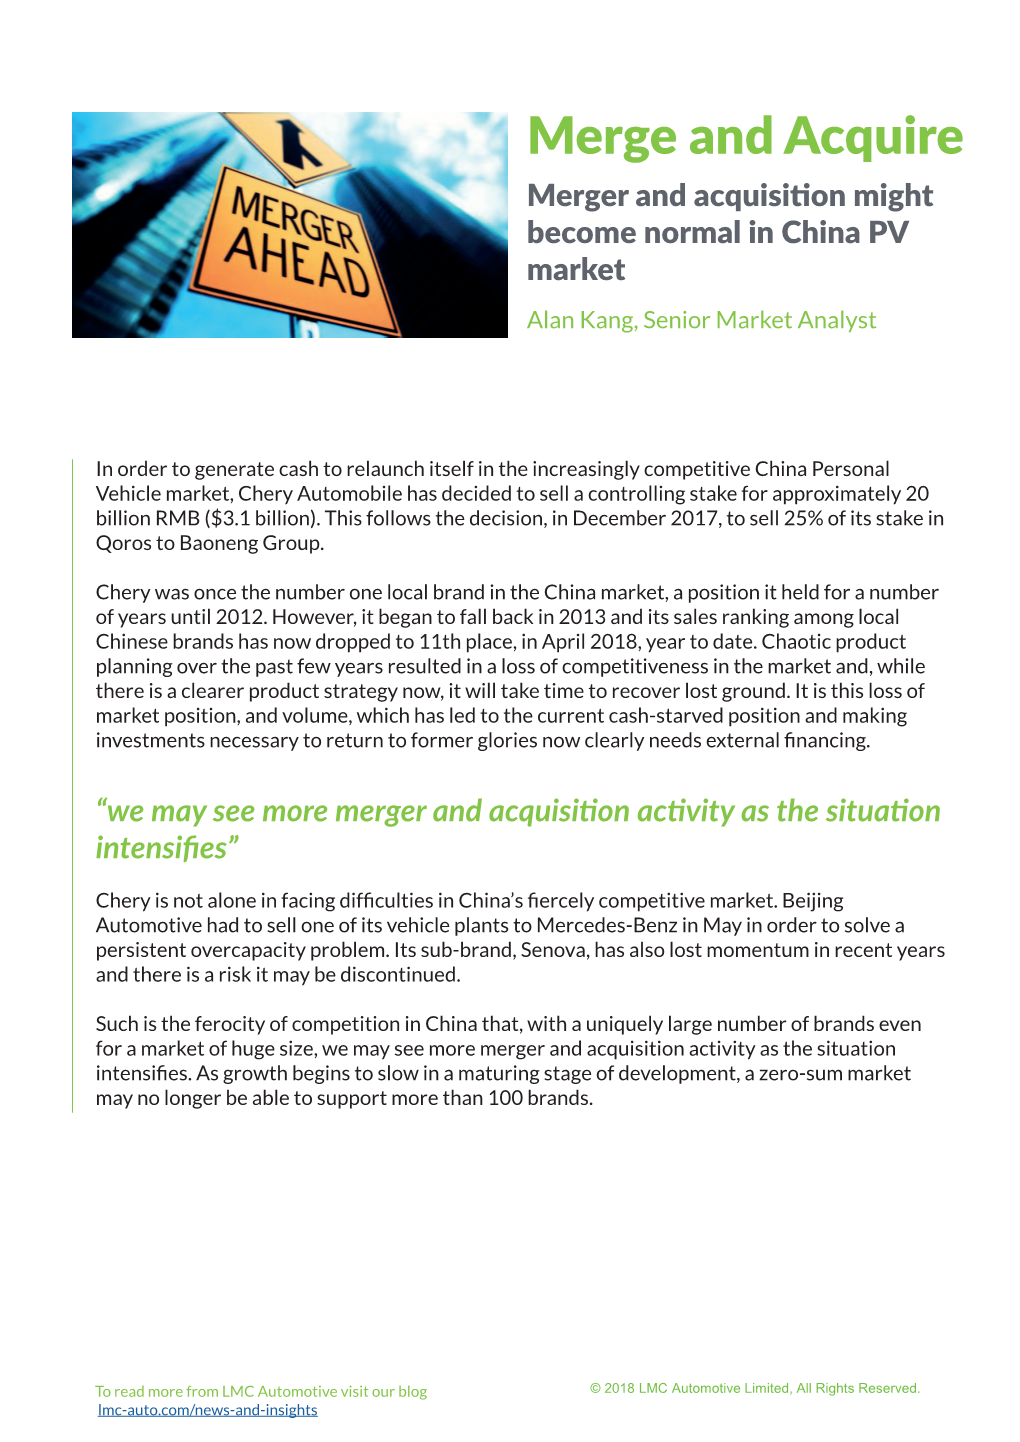 Merge and Acquire Merger and Acquisition Might Become Normal in China PV Market Alan Kang, Senior Market Analyst